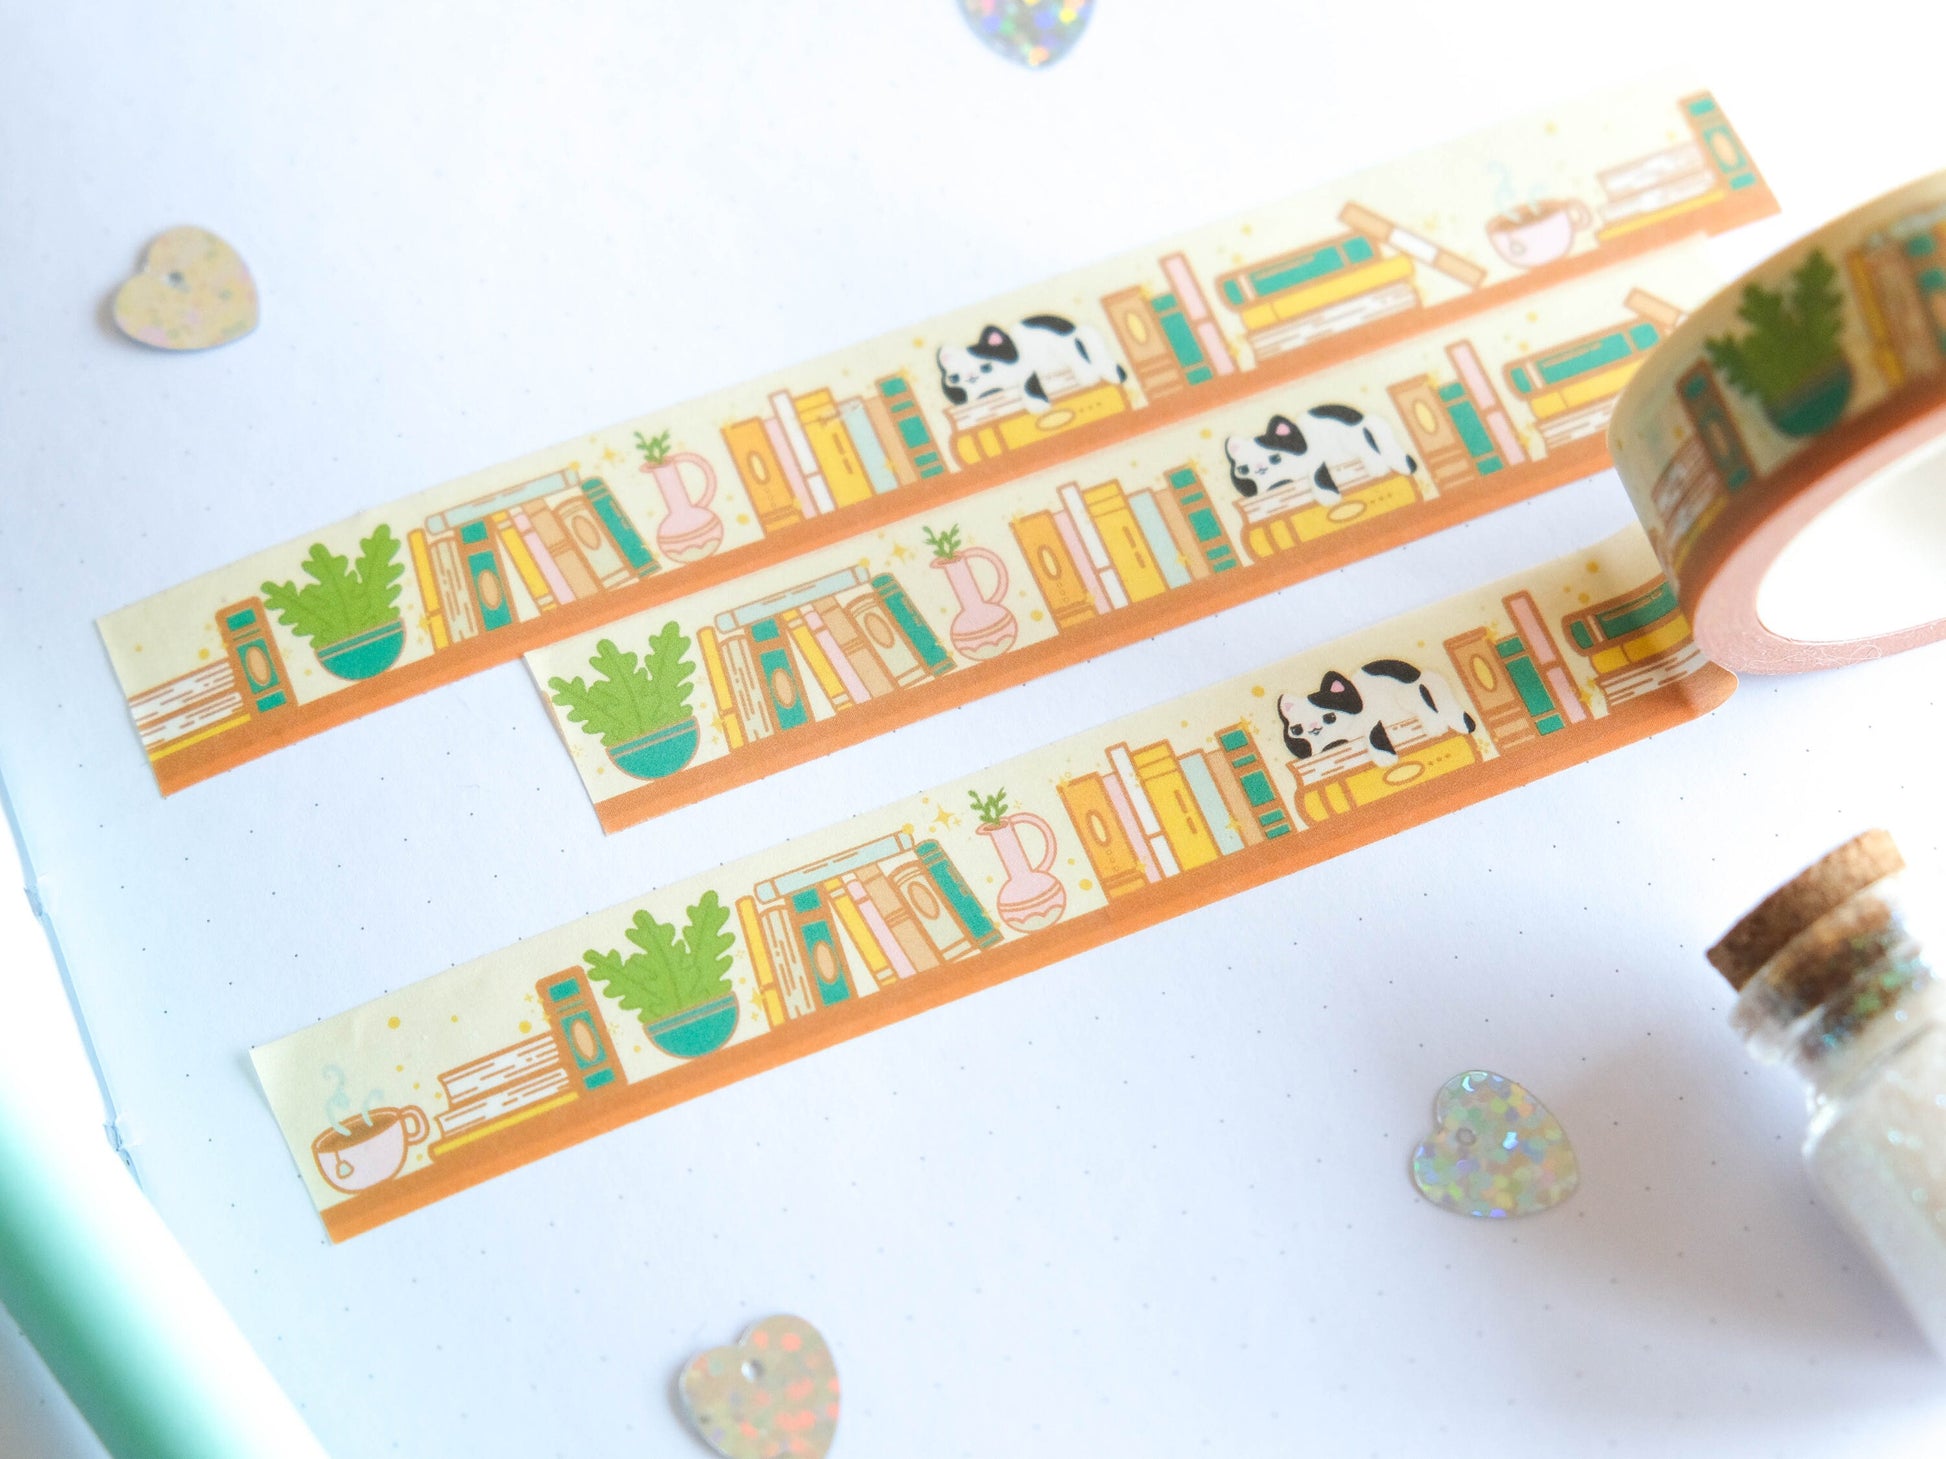 Washi tape kawaii books and for books lovers 15mm x 10m - Masking tape bookworm perfect to decorate bullet journal